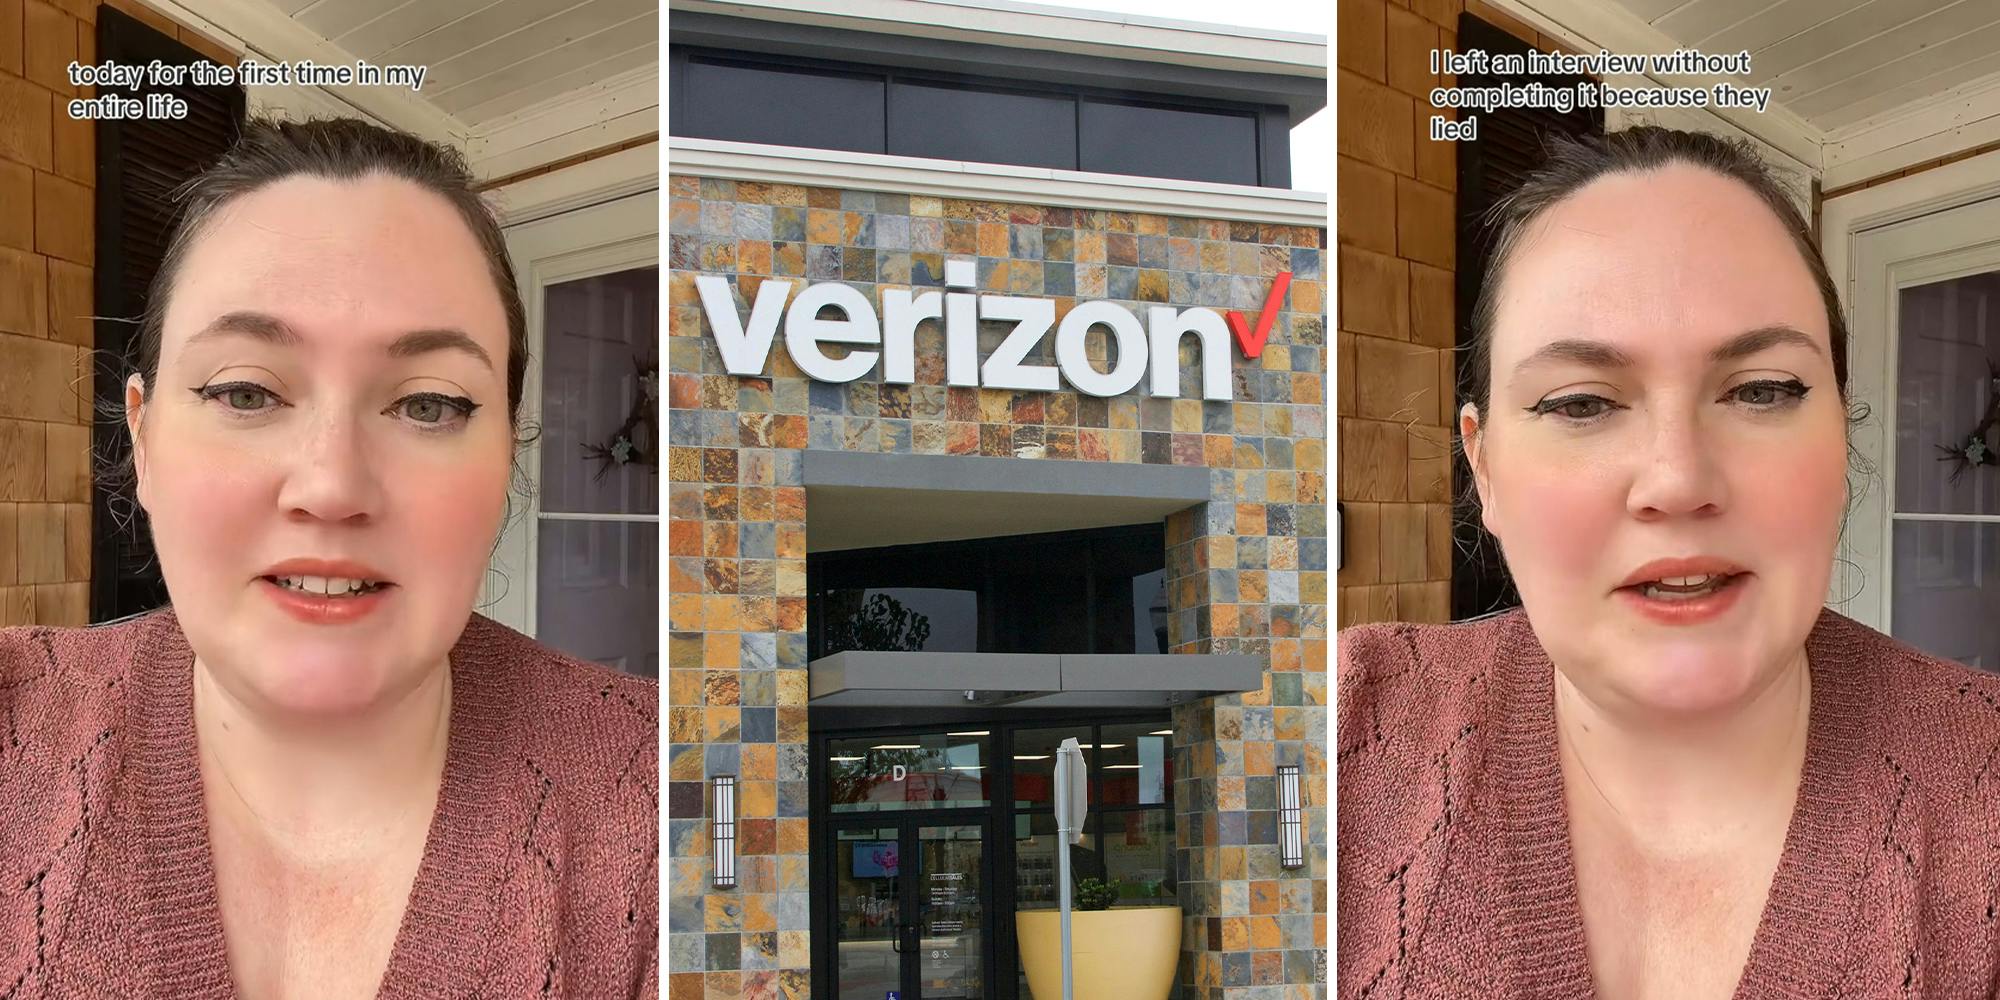 ‘It was absolutely insulting’: Job hunter shows up to interview at a Verizon franchise. It backfires